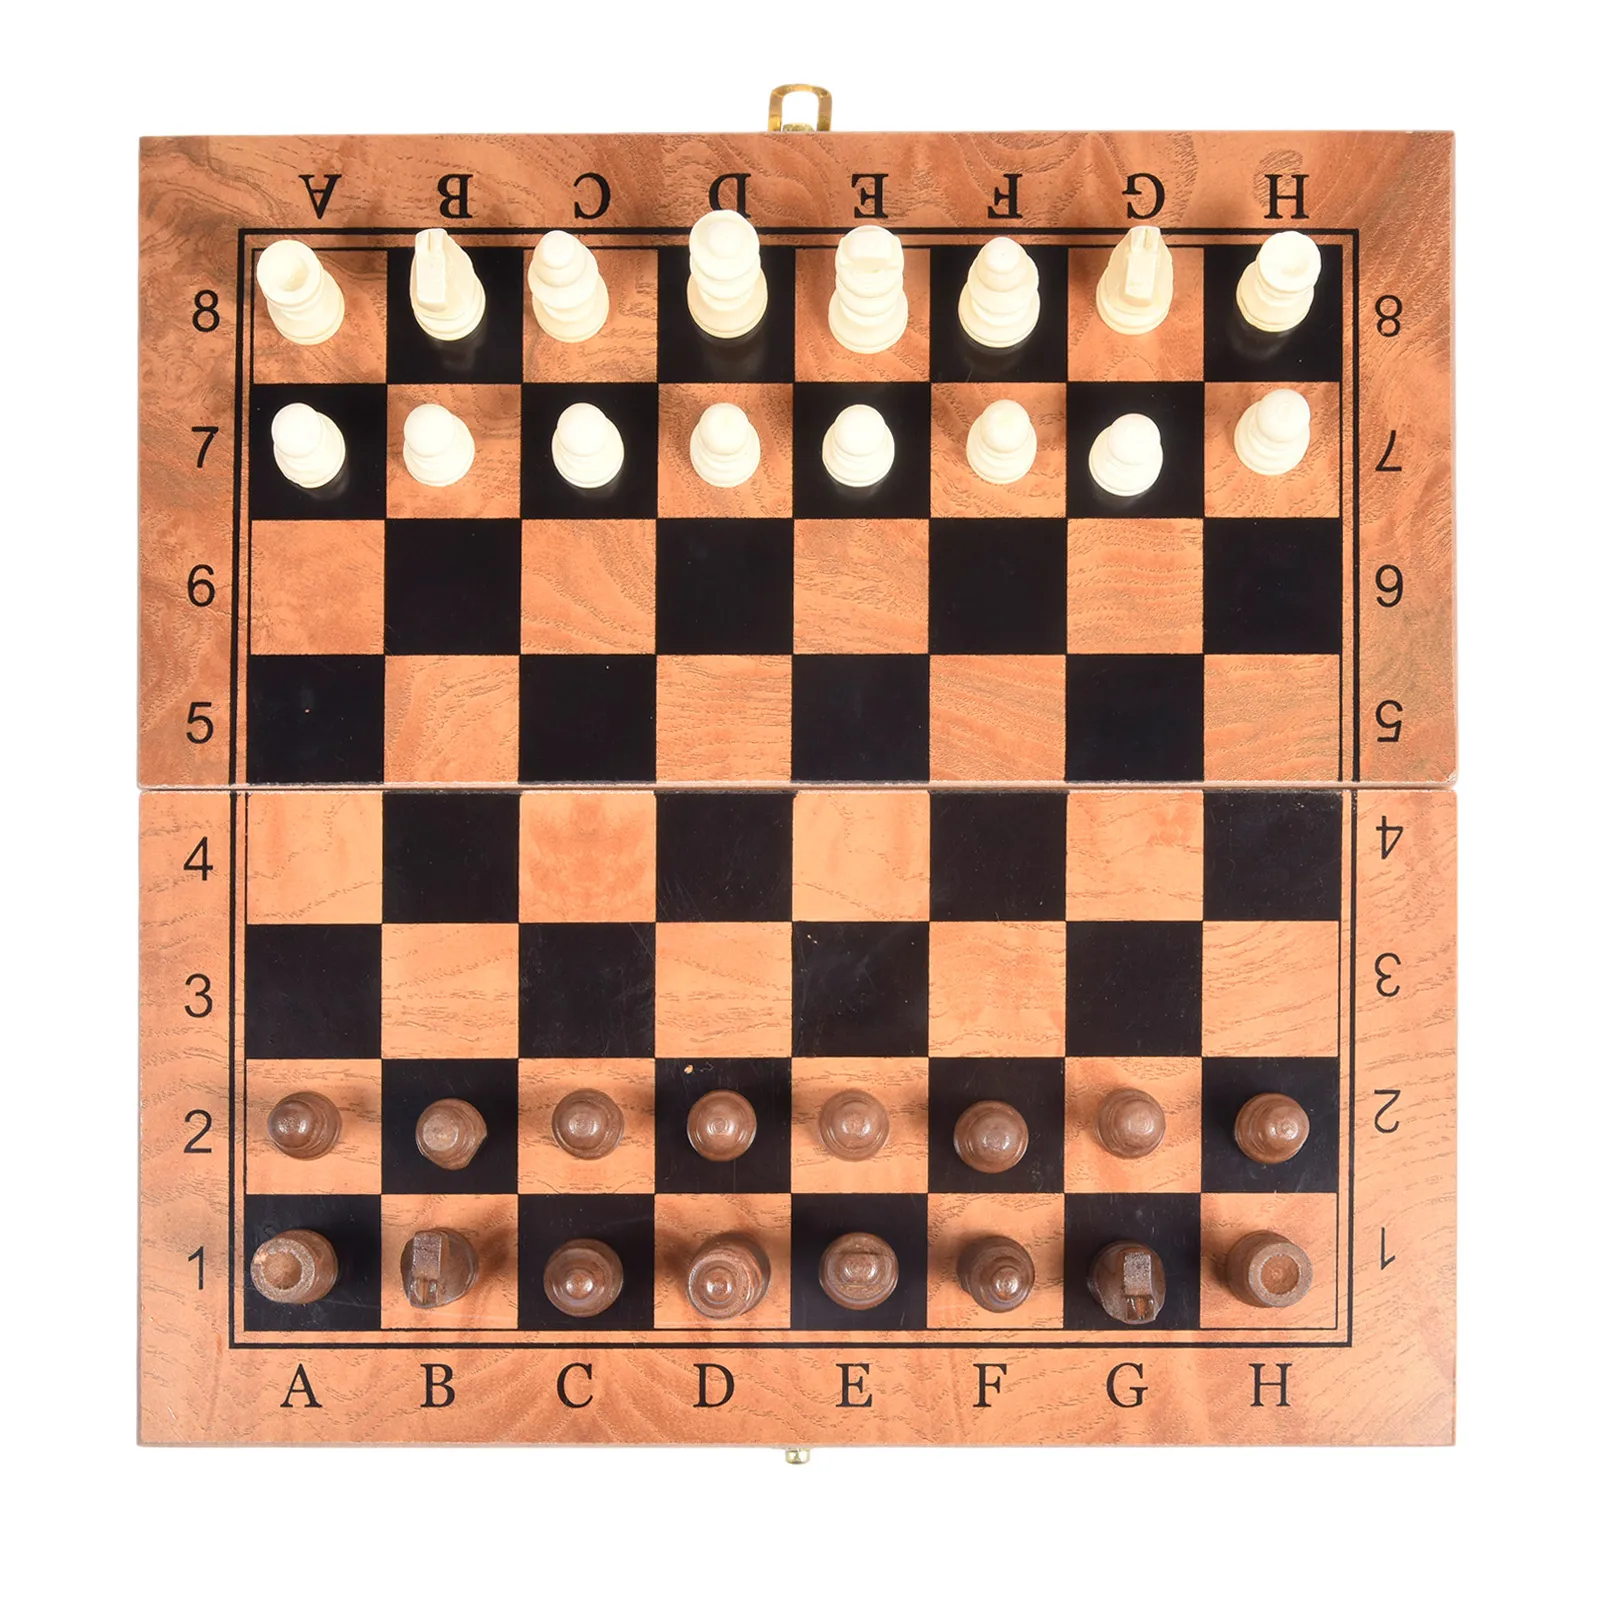 Folding Wooden Chess Set High Quality Standard Chess Board Game Education Toys 